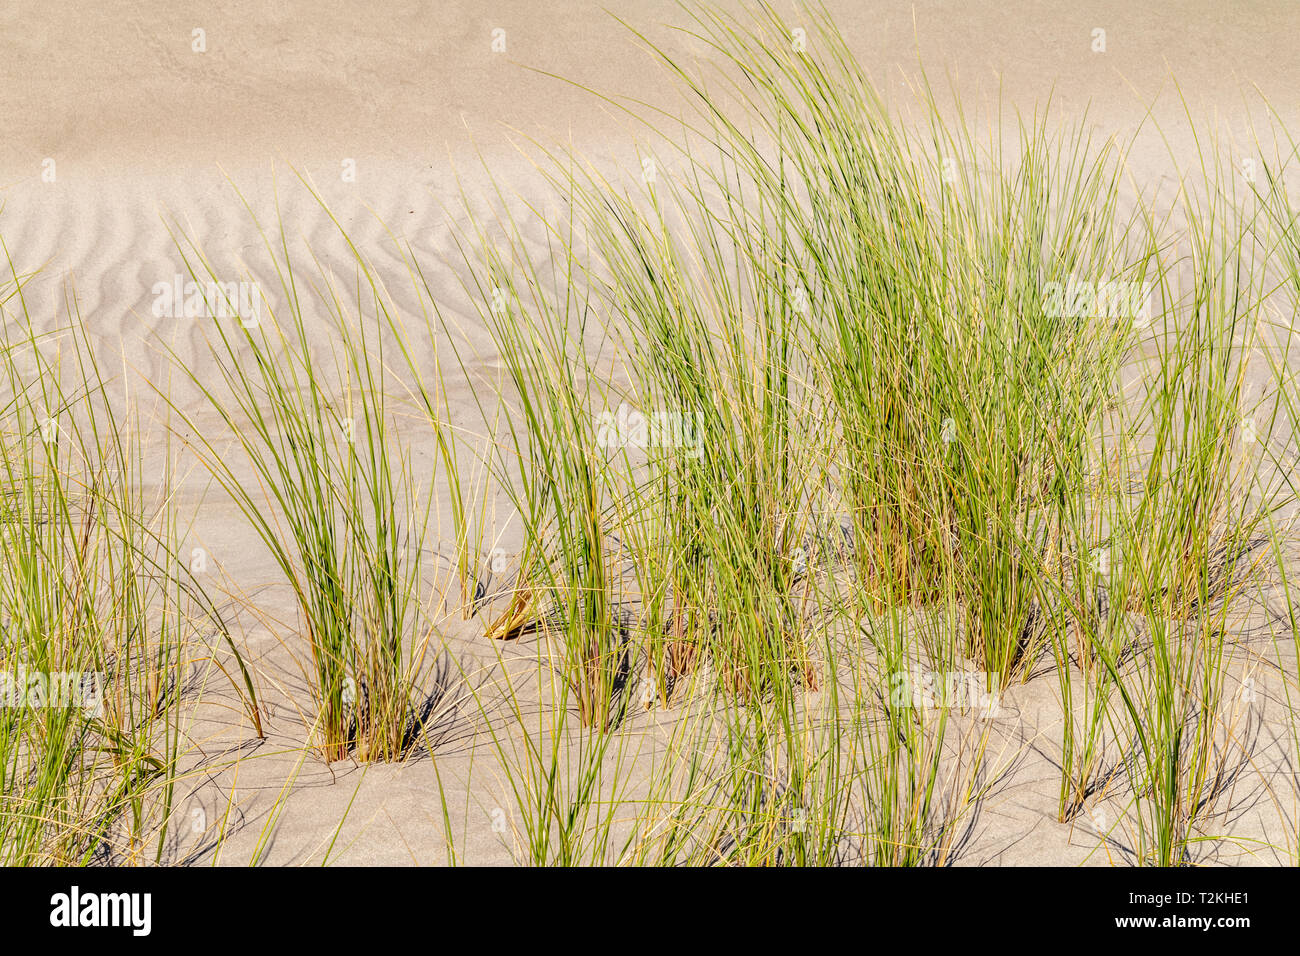 beachgrass vegetation in sandy ambiance seen in southern france Stock Photo